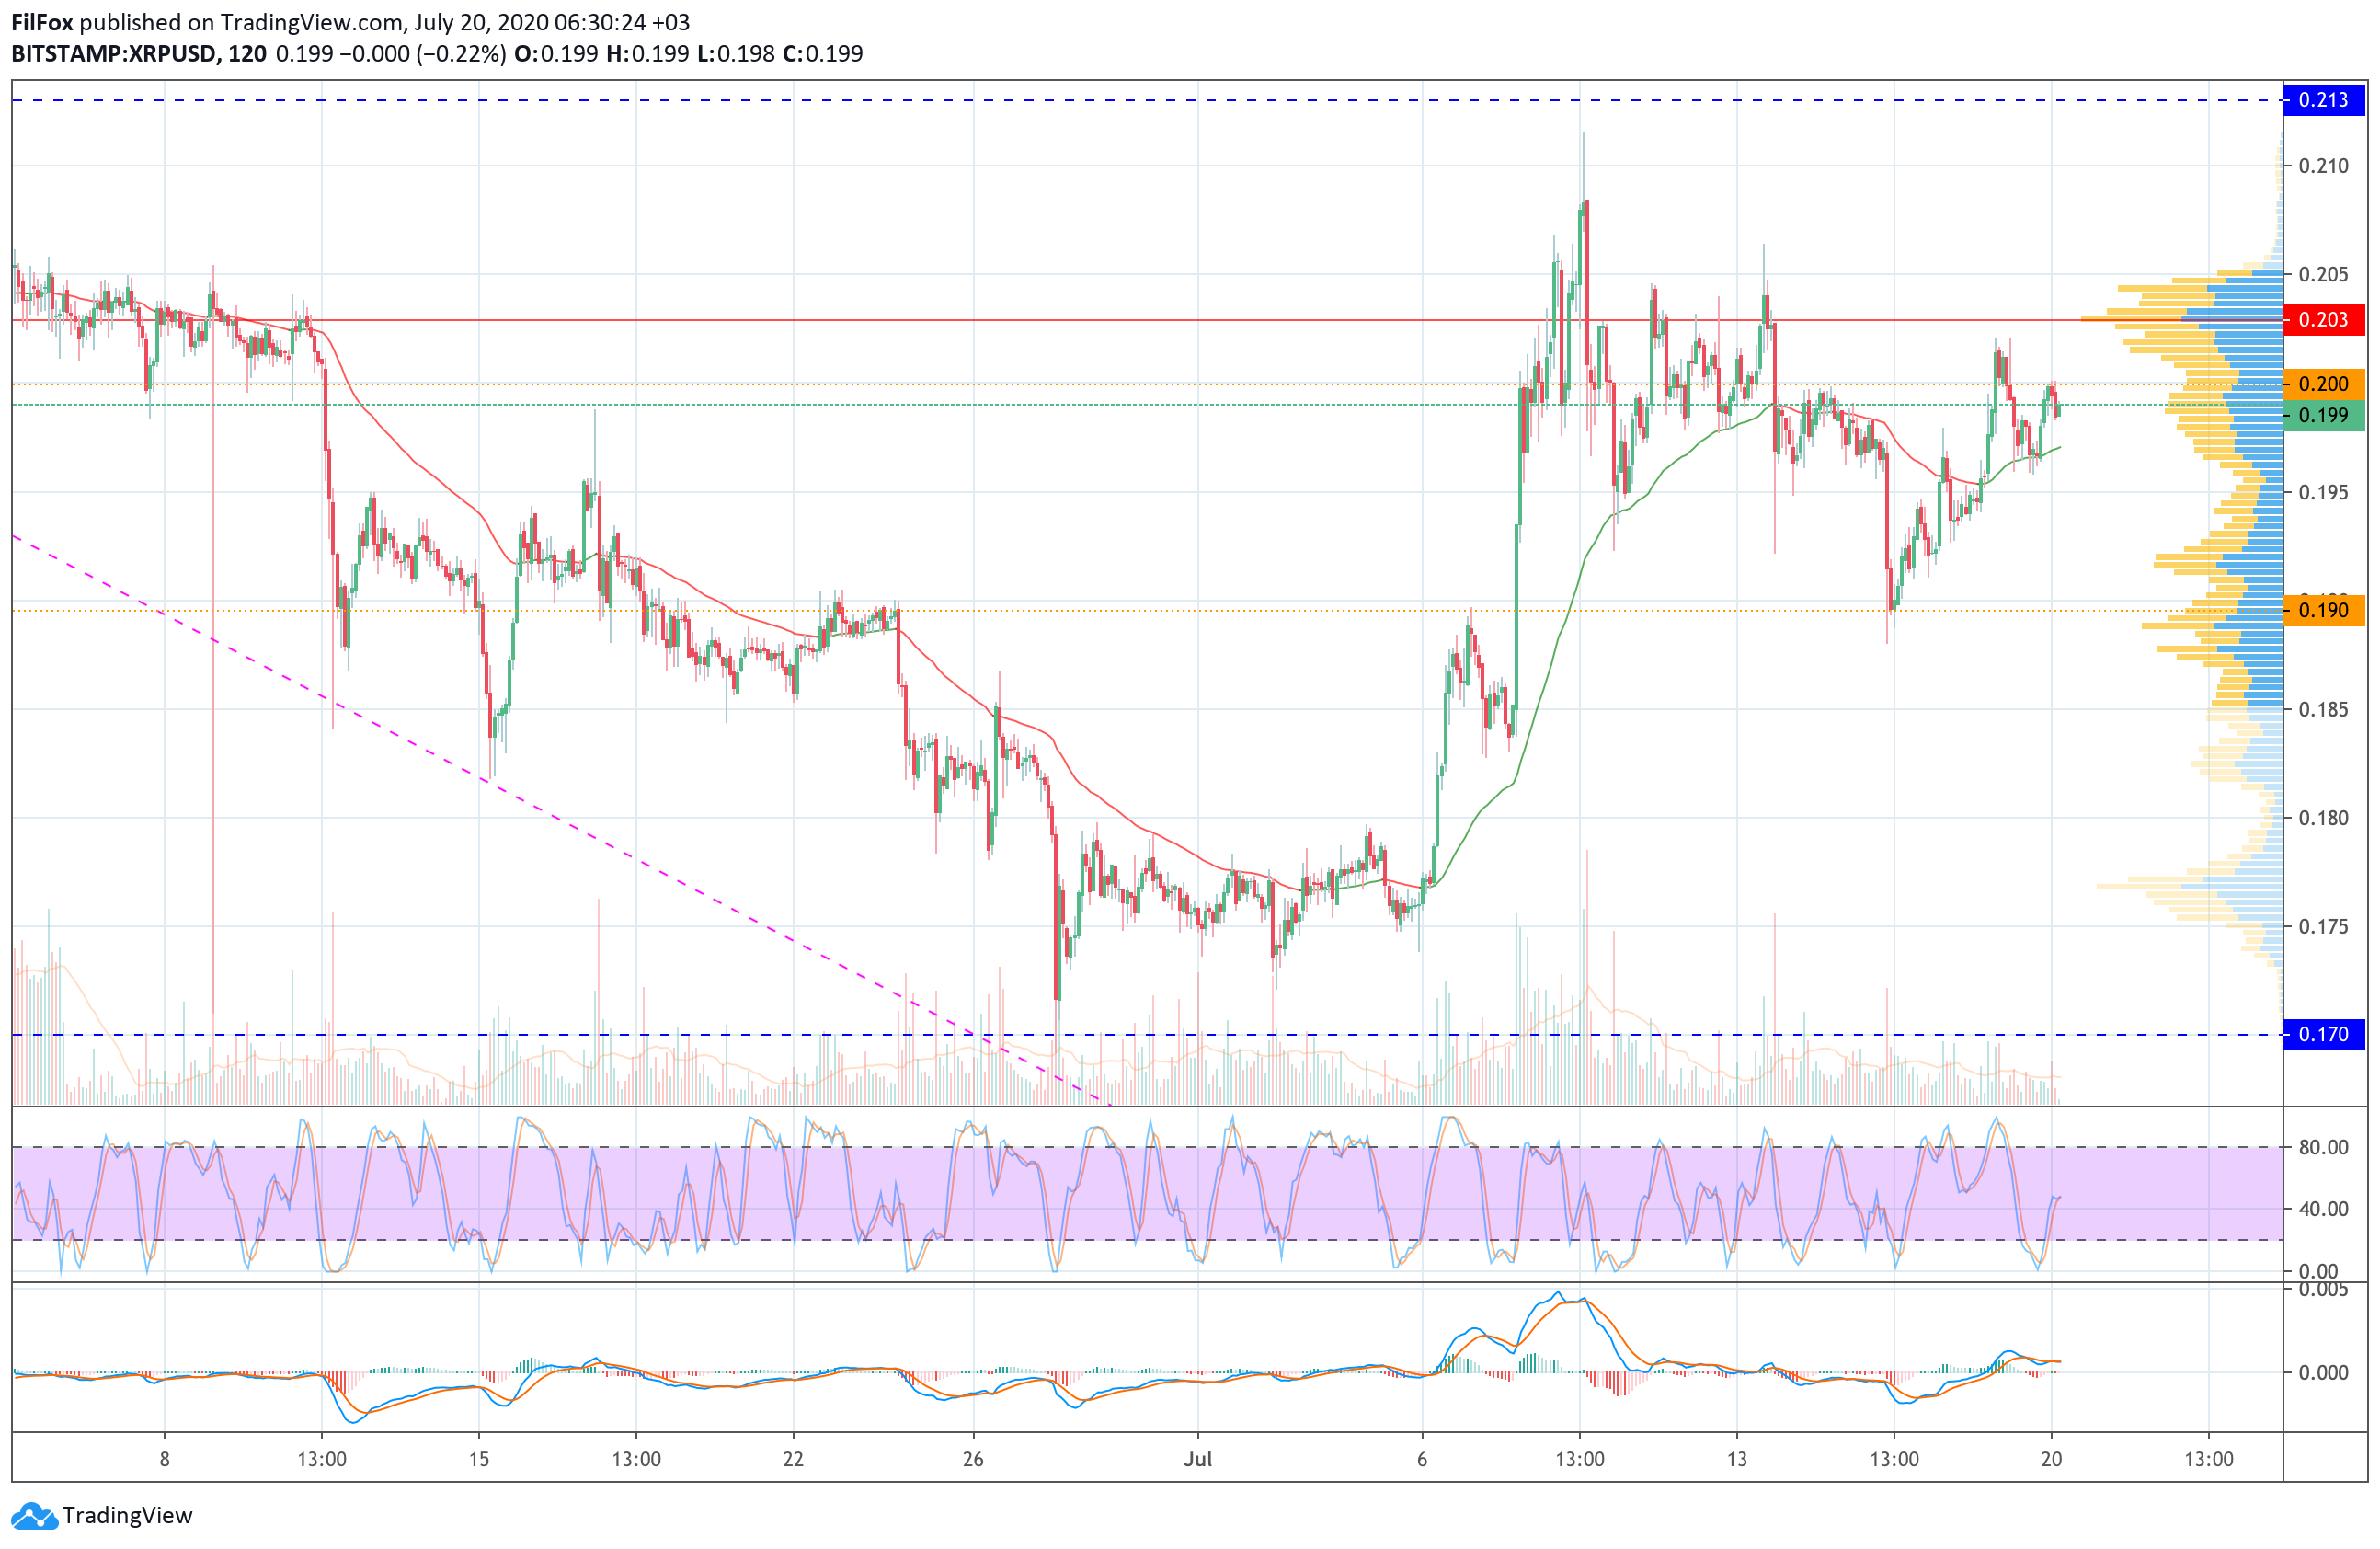 Analysis of prices for Bitcoin, Ethereum, XRP for 07/20/2020